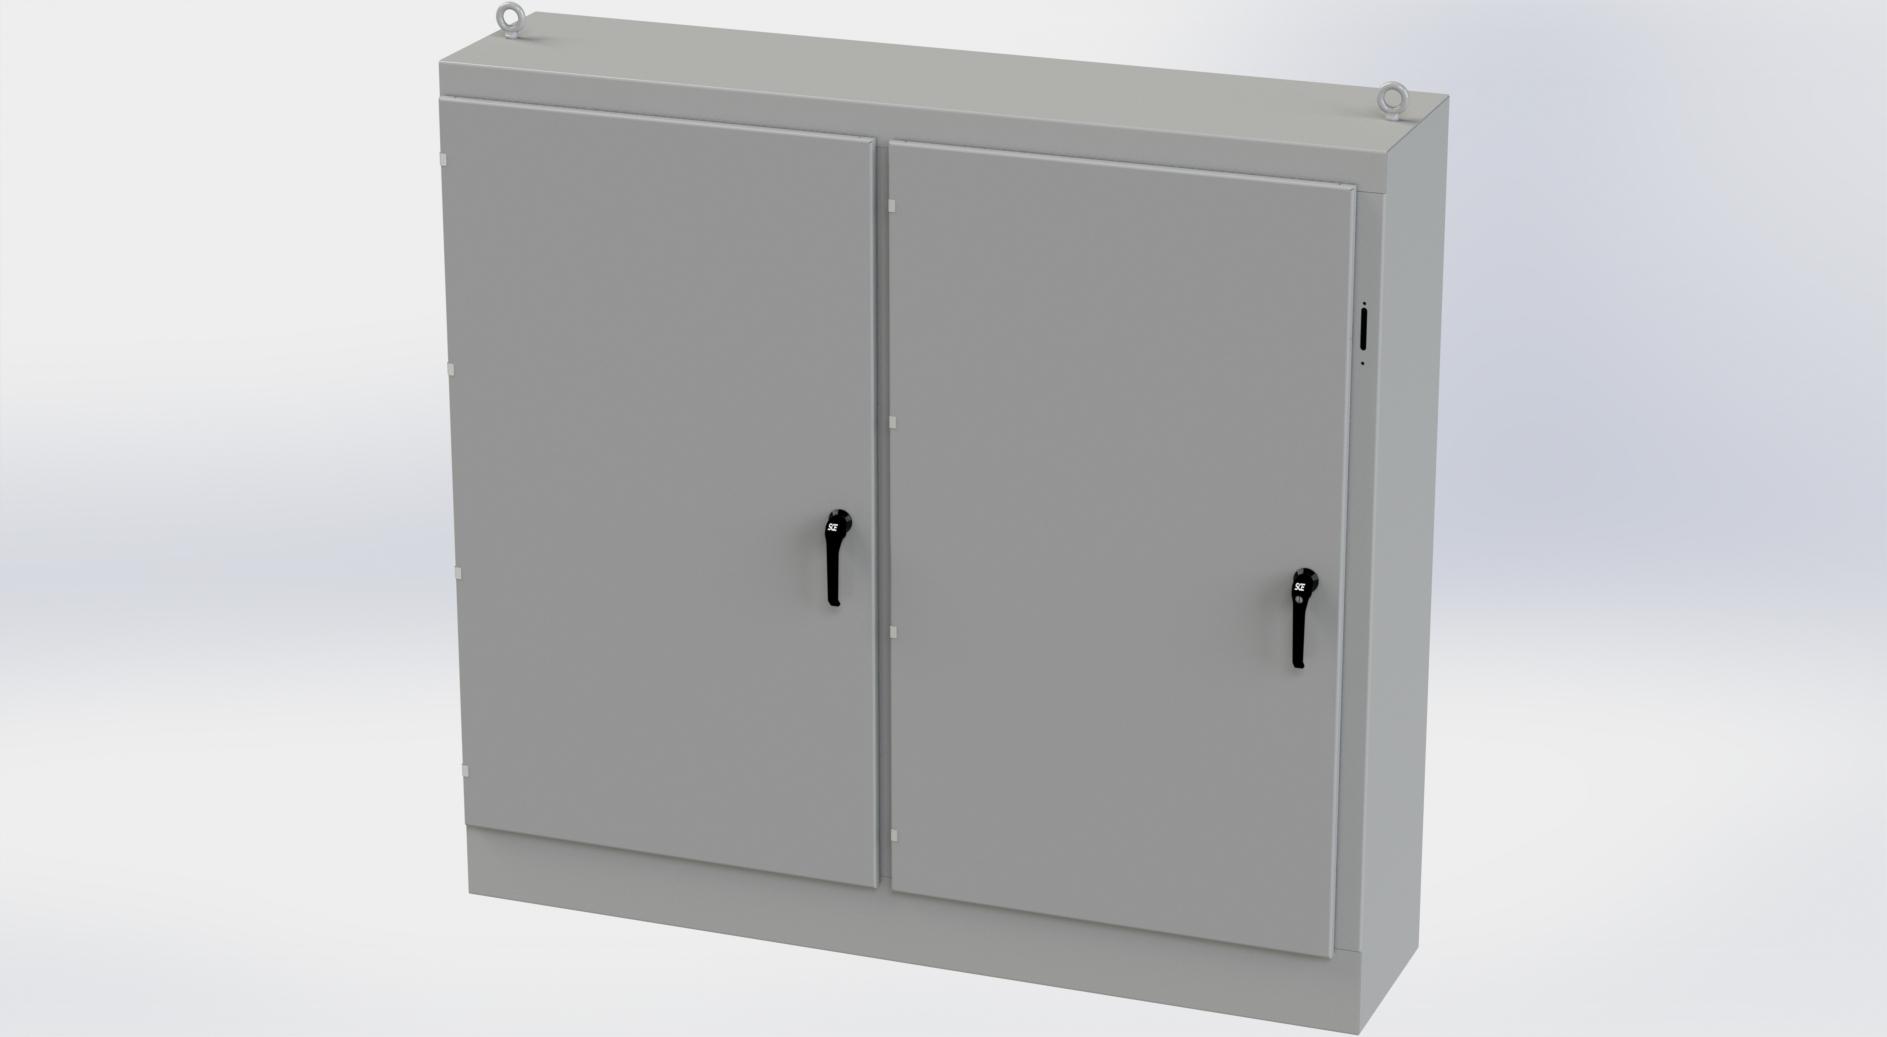 Saginaw Control SCE-72XM7818 2DR XM Enclosure, Height:72.00", Width:77.75", Depth:18.00", ANSI-61 gray powder coating inside and out. Sub-panels are powder coated white.